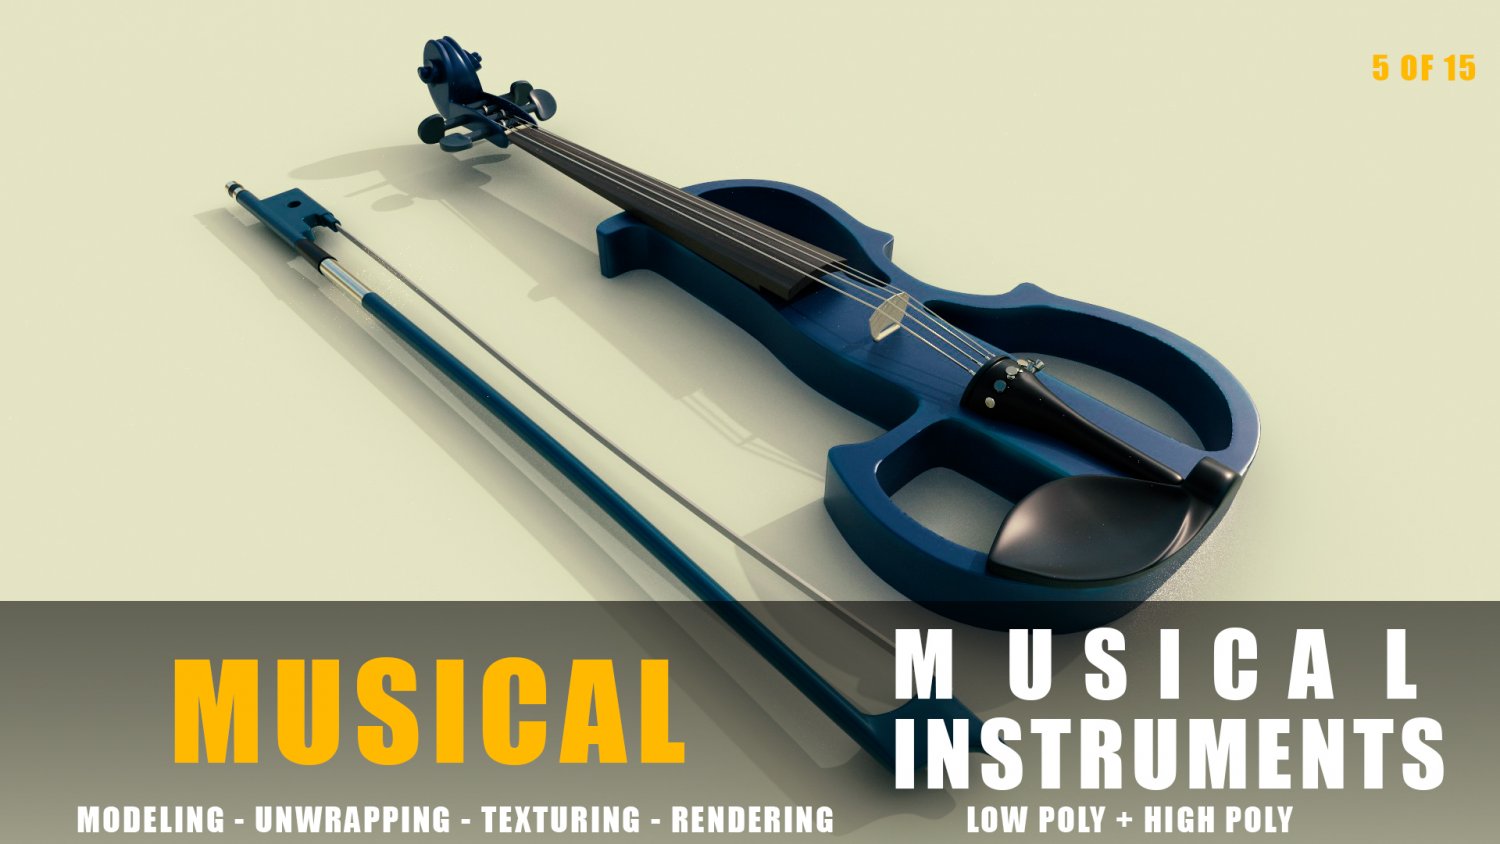 préstamo cometer Marinero electric violin musical instruments full detail low poly and high poly  Modelo 3D in Otros 3DExport